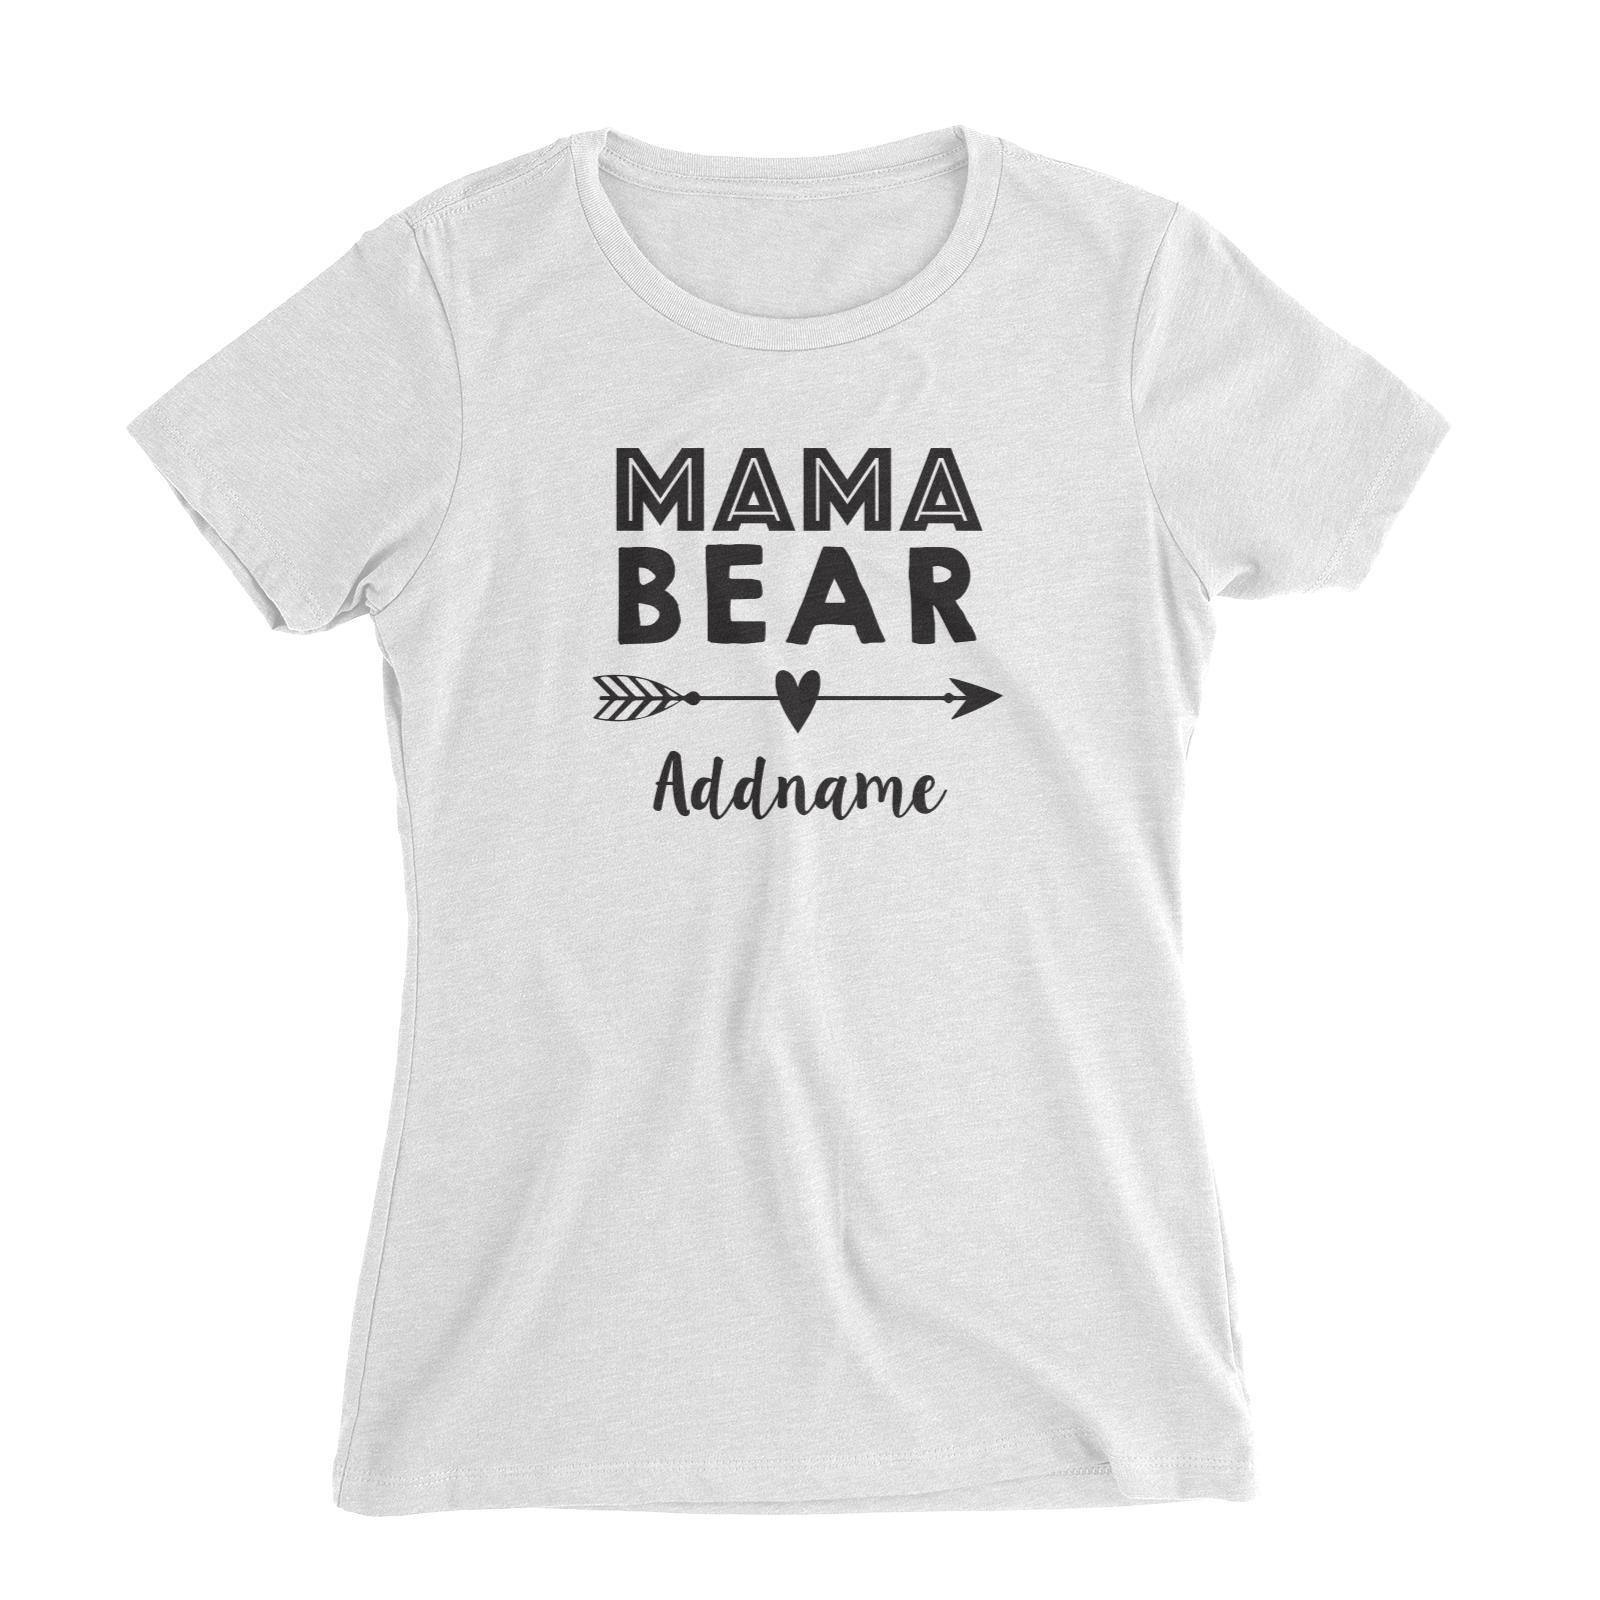 Mama Bear Addname Women's Slim Fit T-Shirt  Matching Family Personalizable Designs